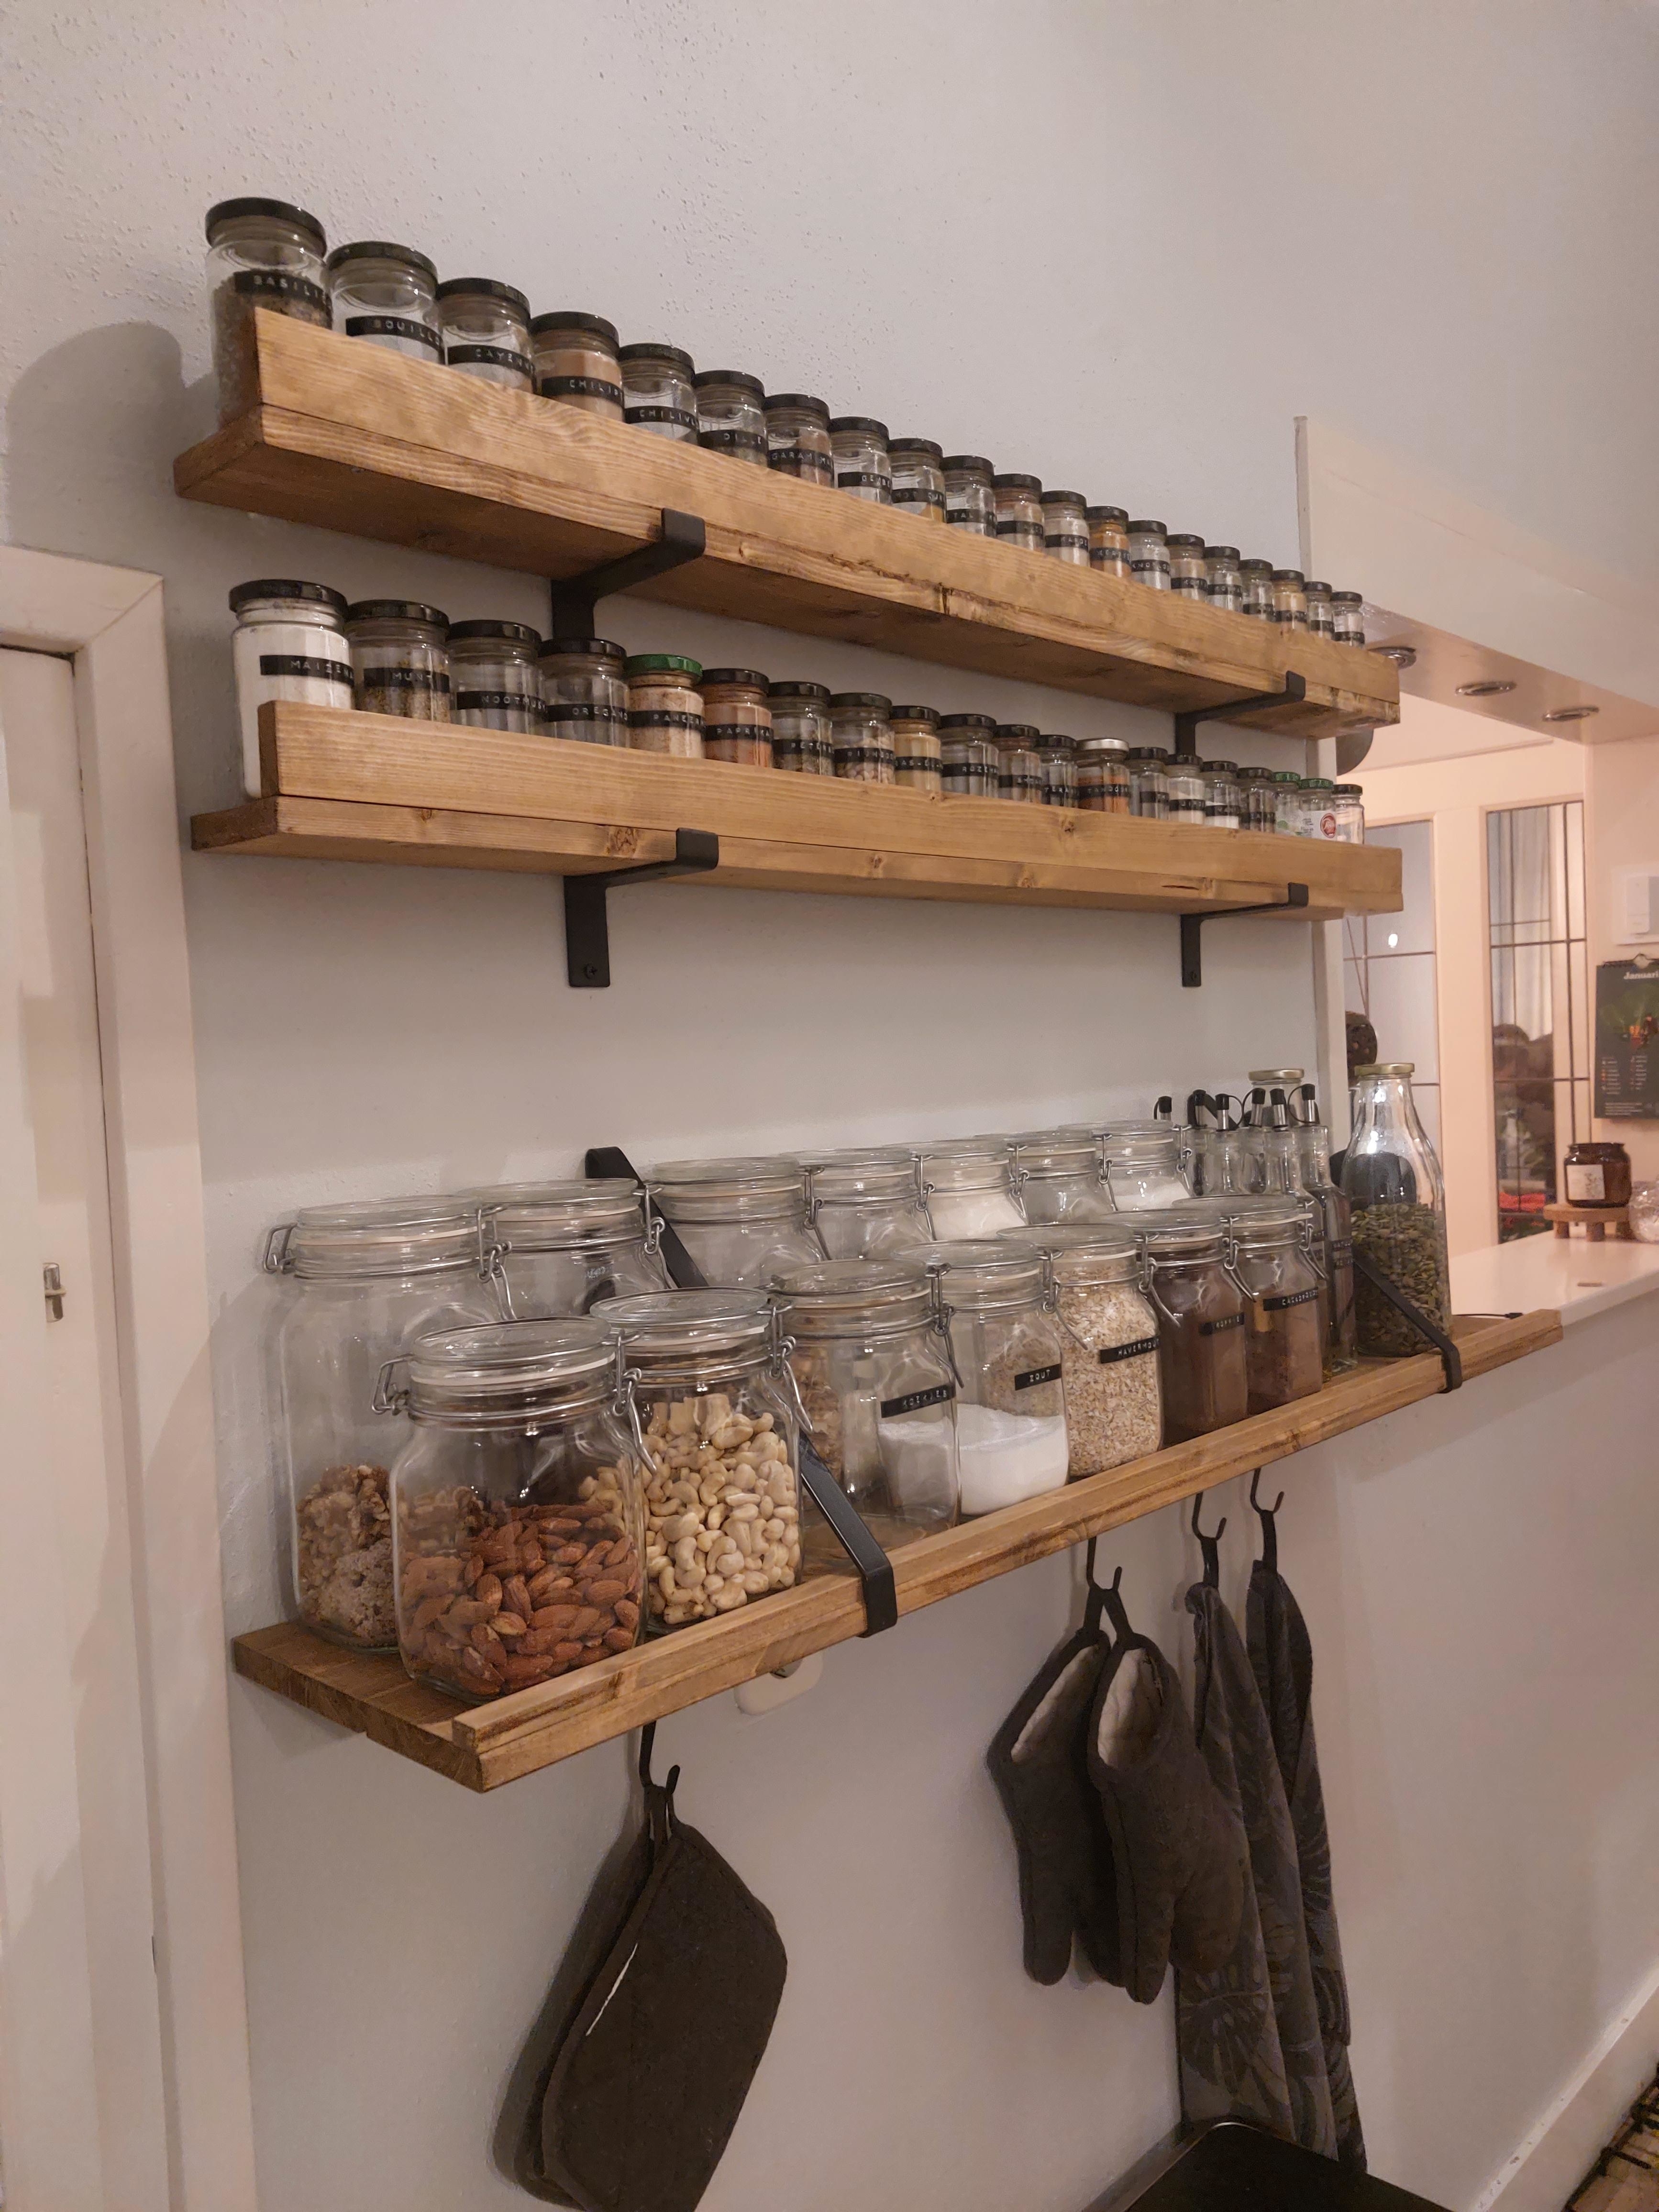 Wood shelves on kitchen wall storing dry goods, spices, and canisters of food